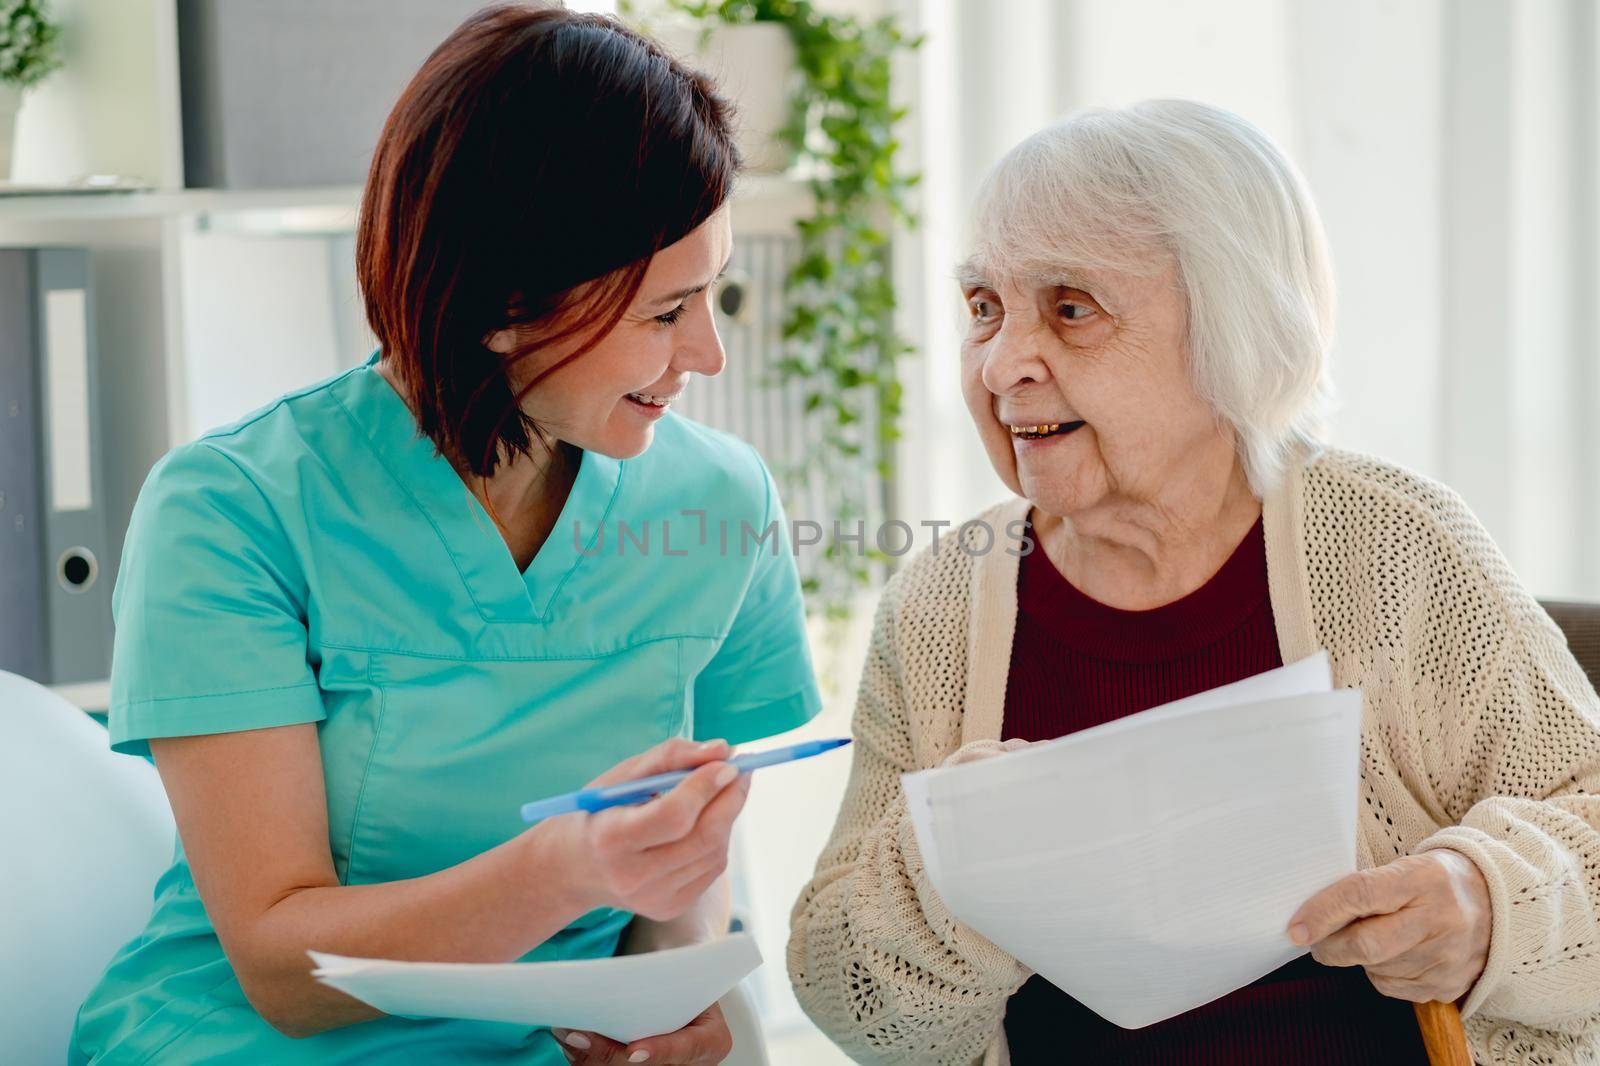 Therapist talking with old woman patient while holding papers and pen during appointment in clinic